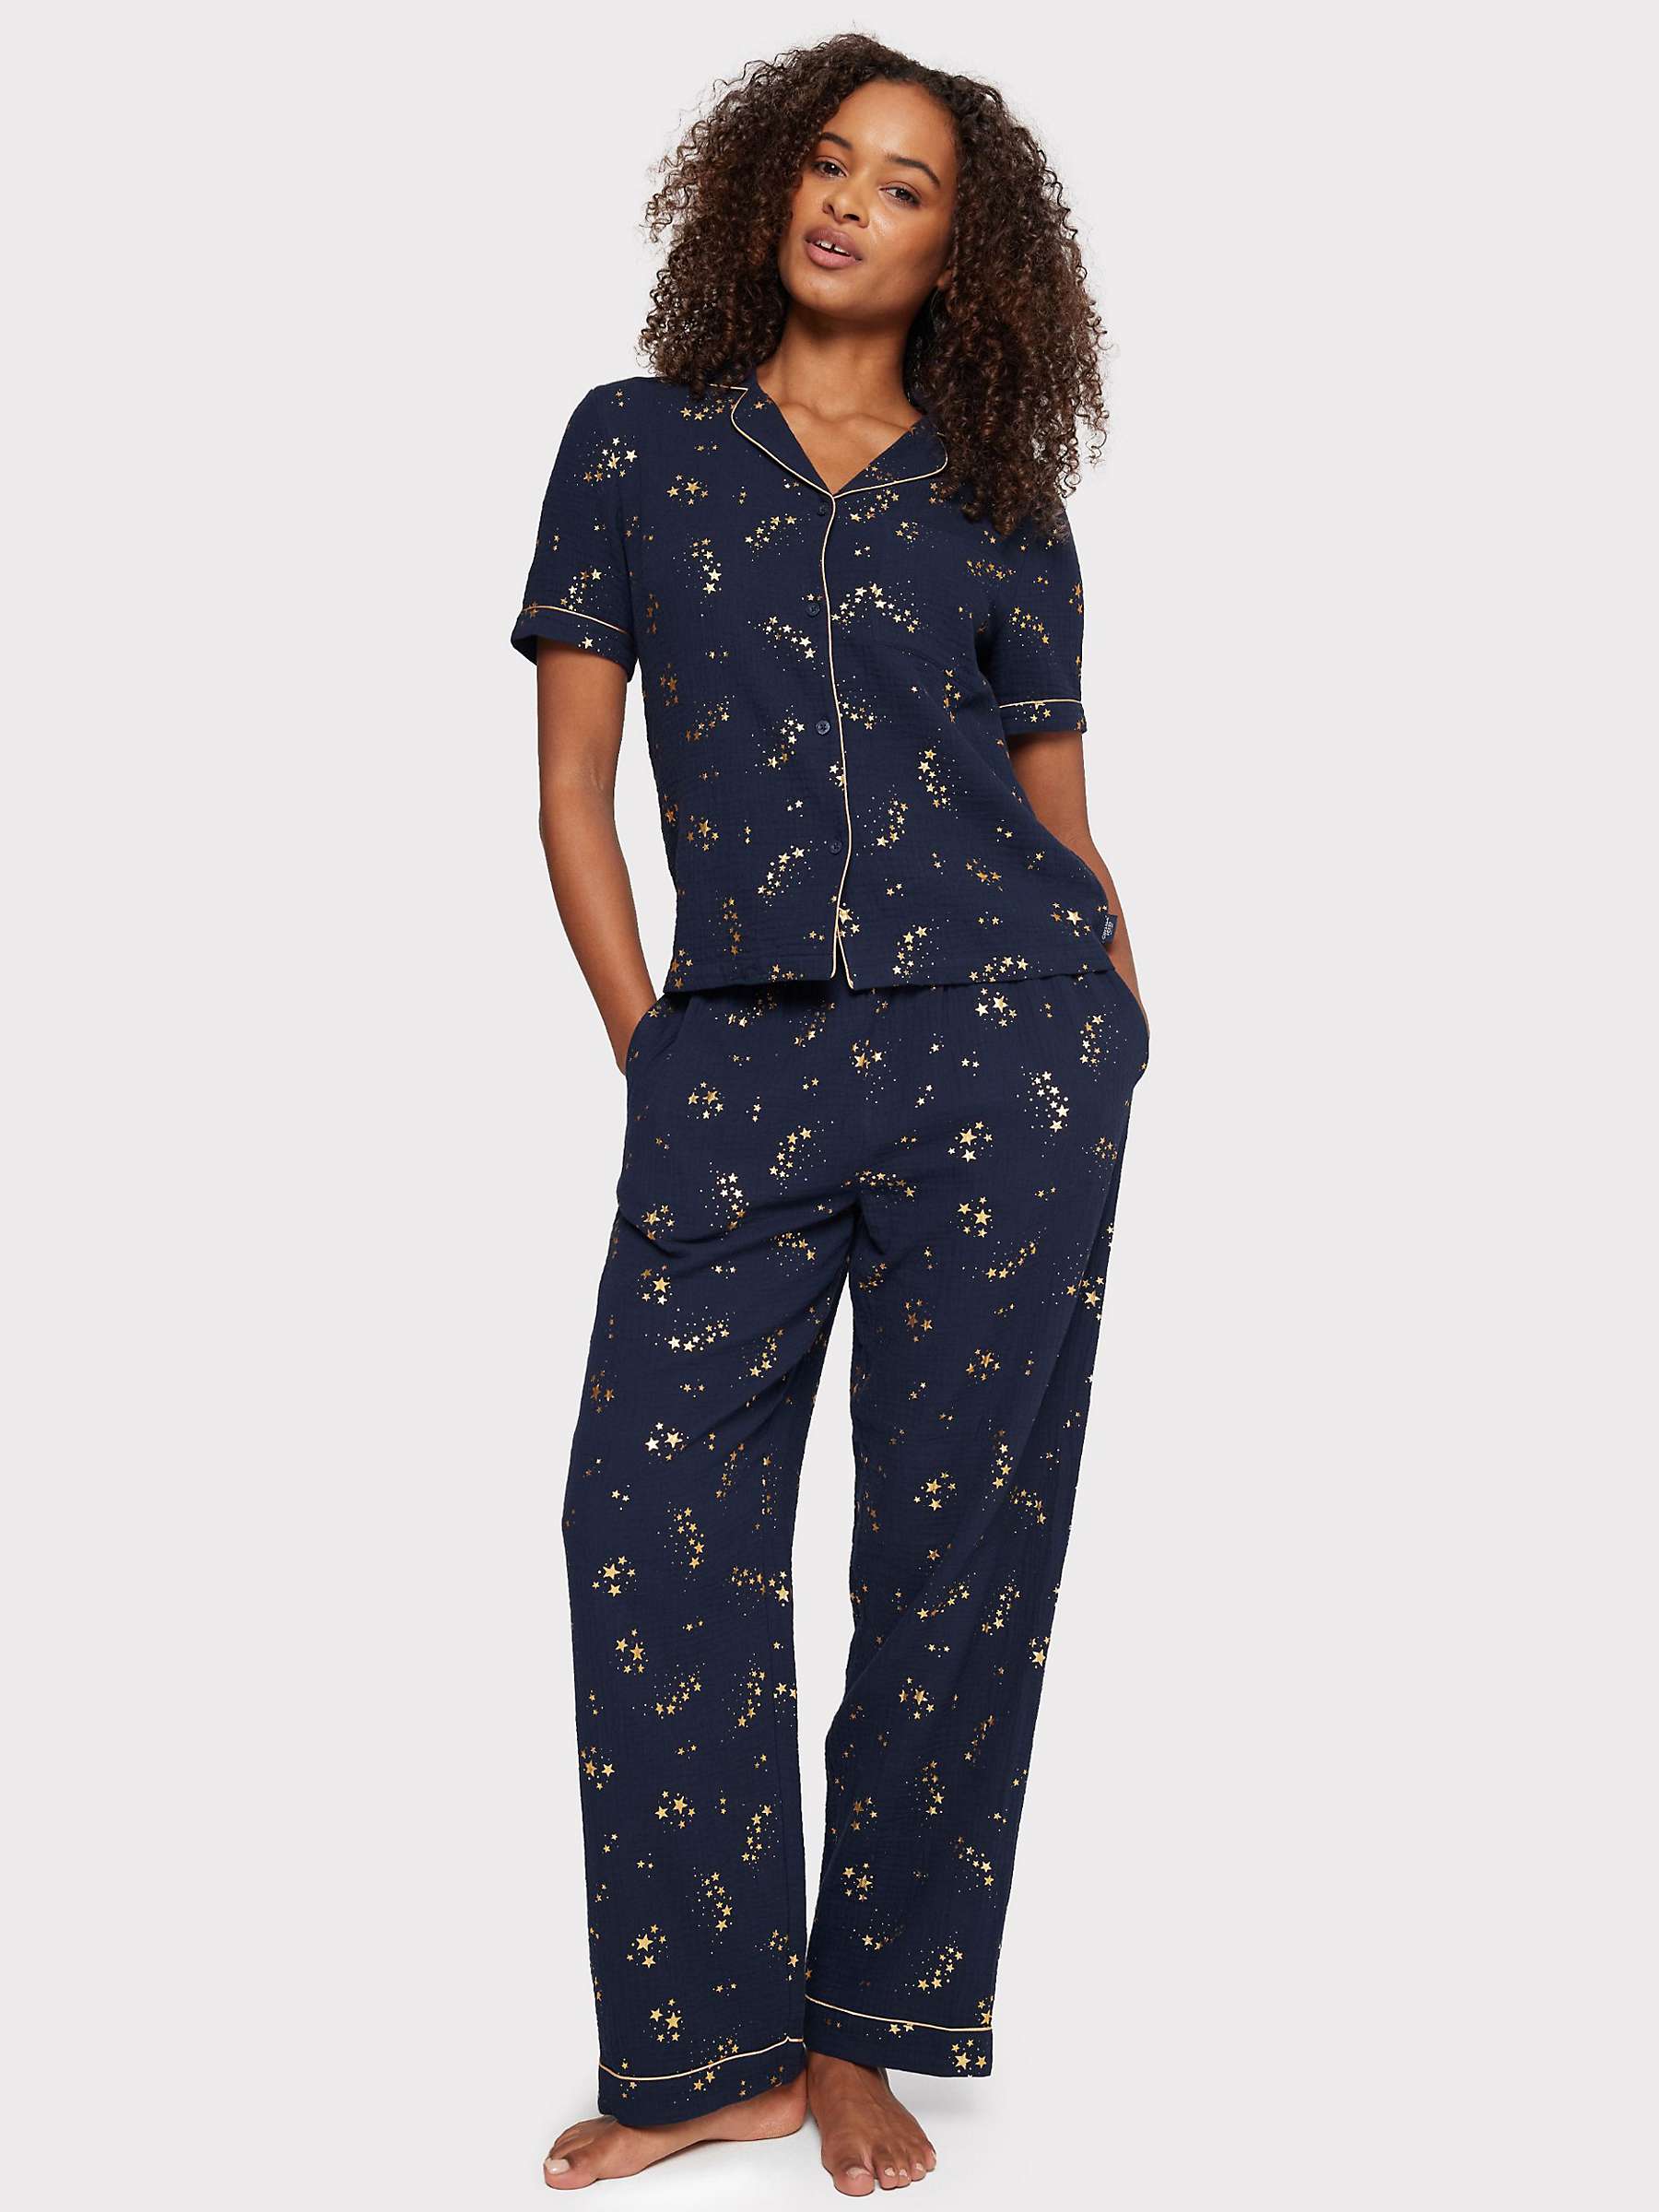 Buy Chelsea Peers Cotton Cheesecloth Foil Star Long Pajama Set Online at johnlewis.com